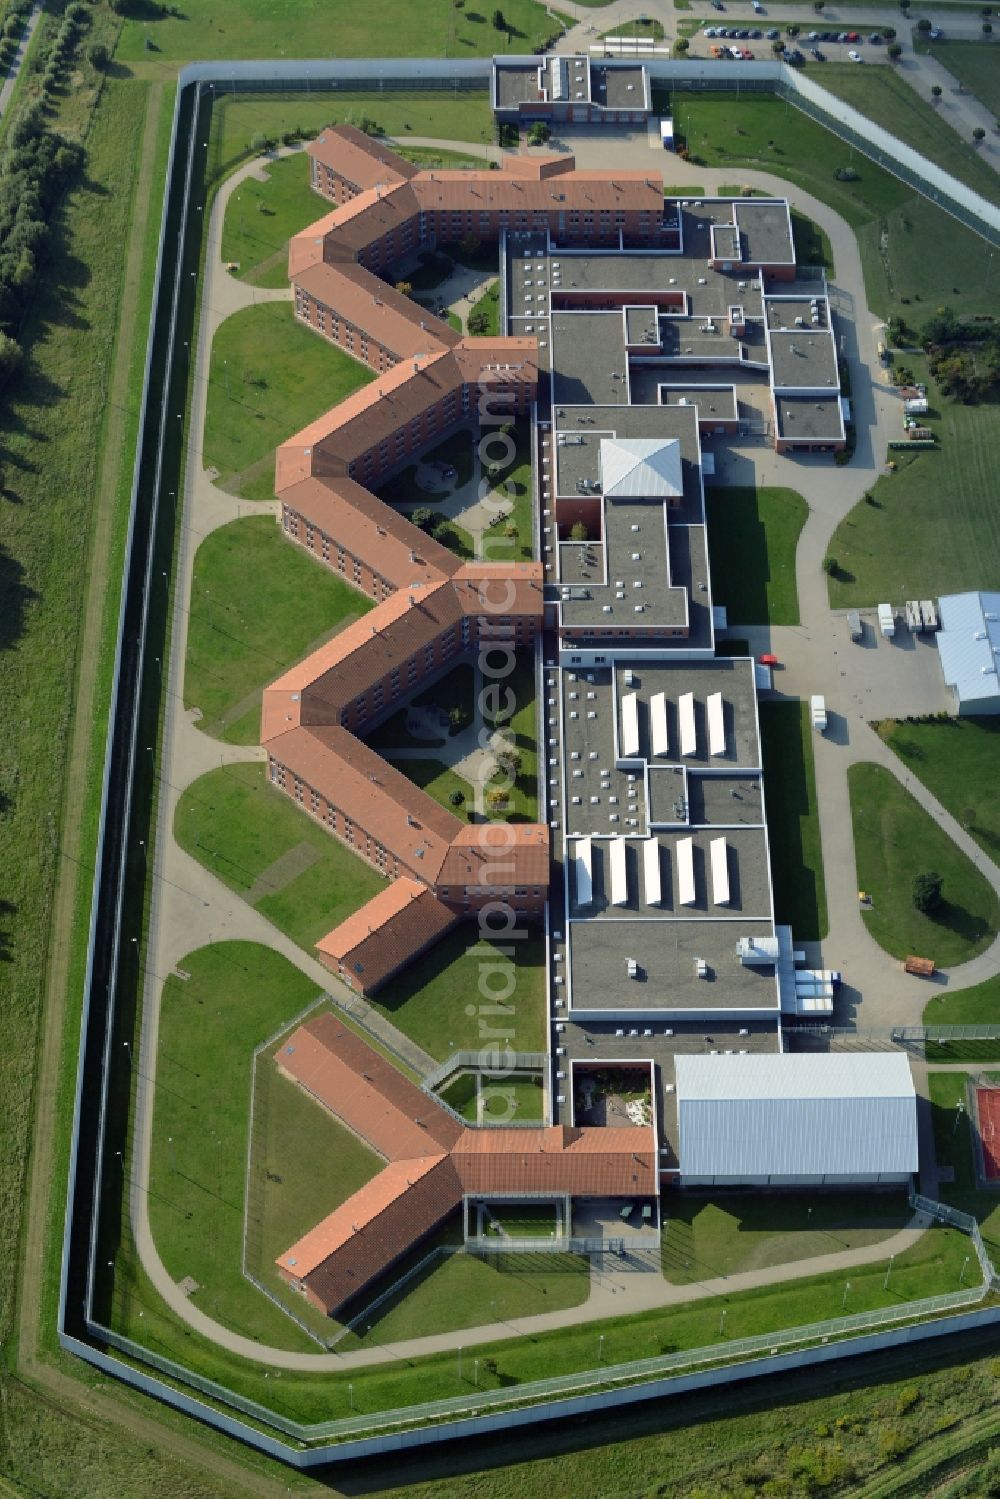 Aerial image Sehnde - Prison grounds and high security fence Prison in Sehnde in the state Lower Saxony